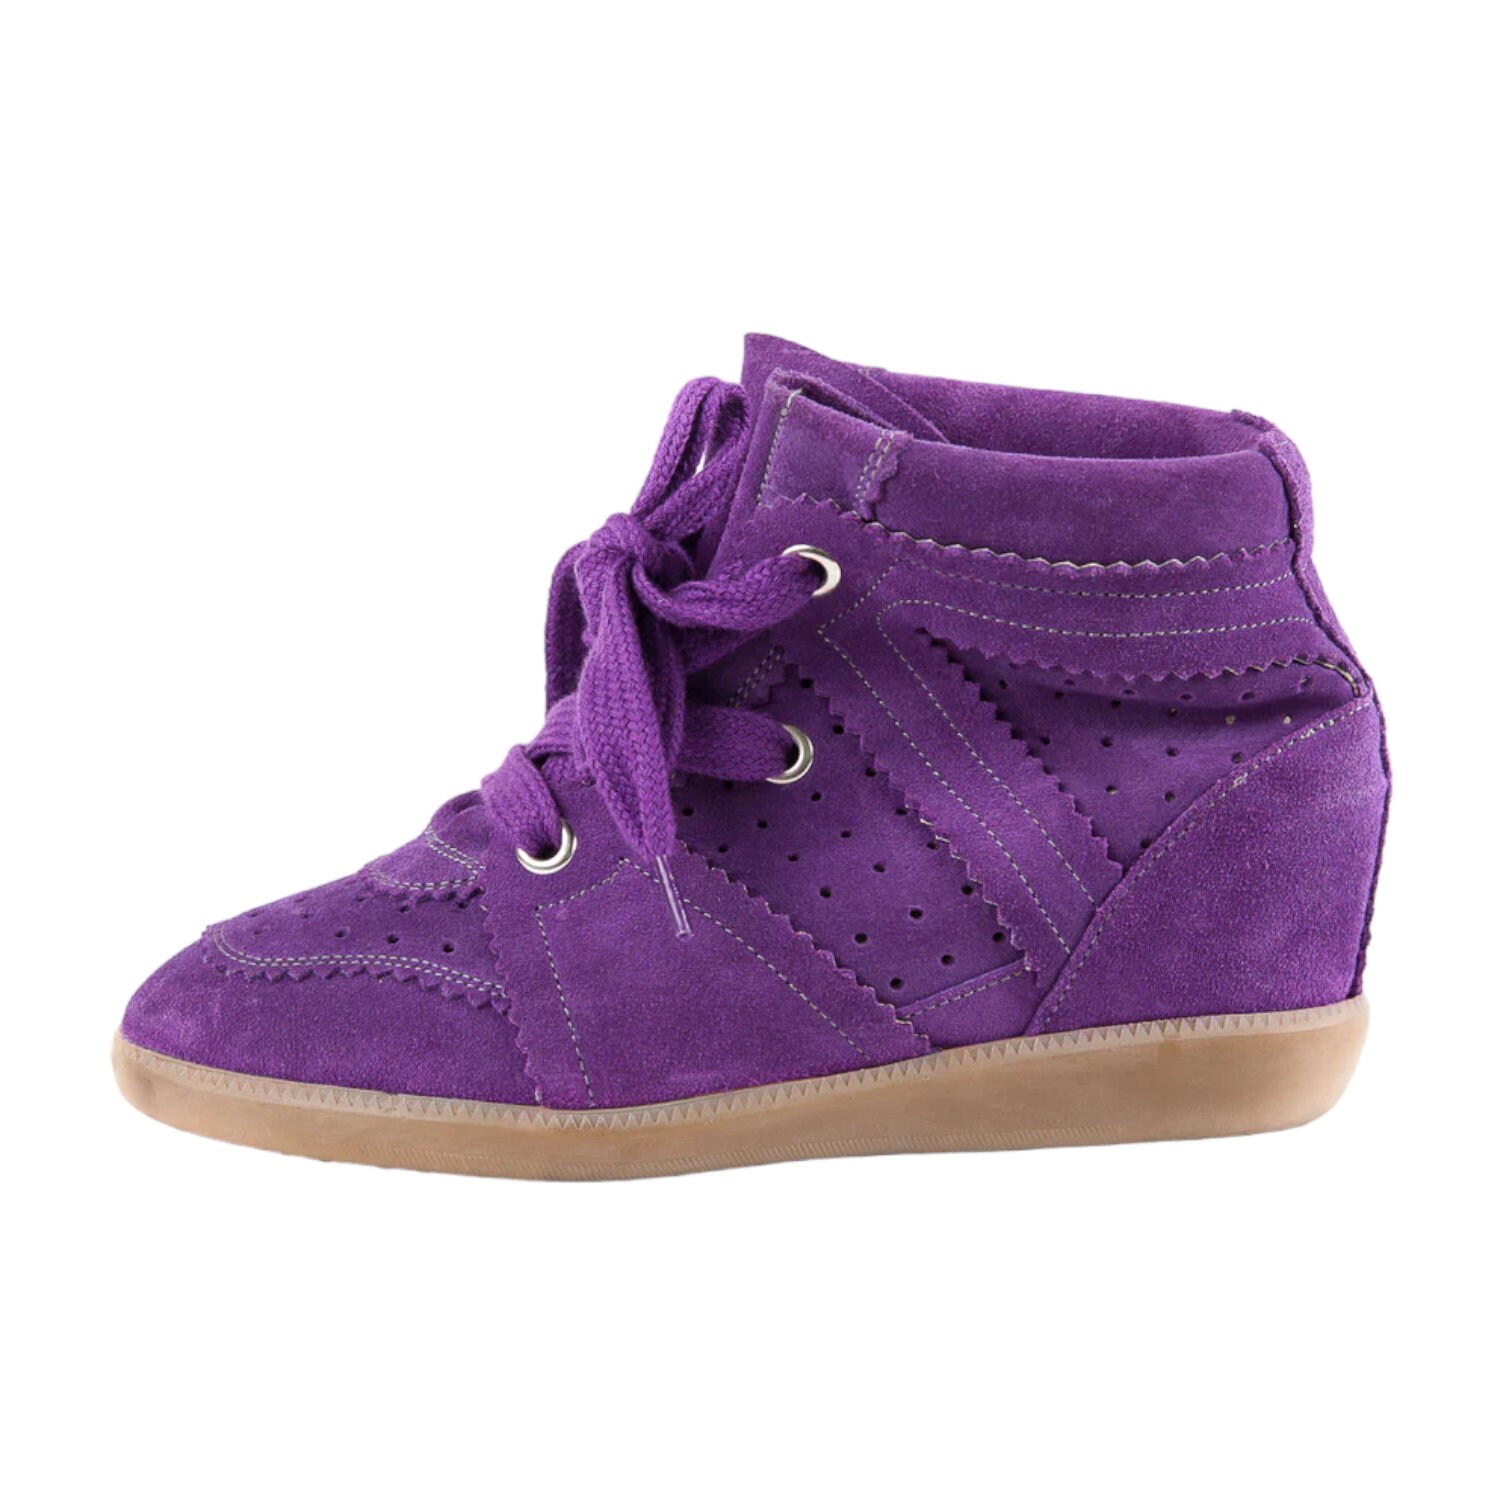 Isabel Marant Etoile Bobby Concealed Suede Sneakers 37 - Etsy